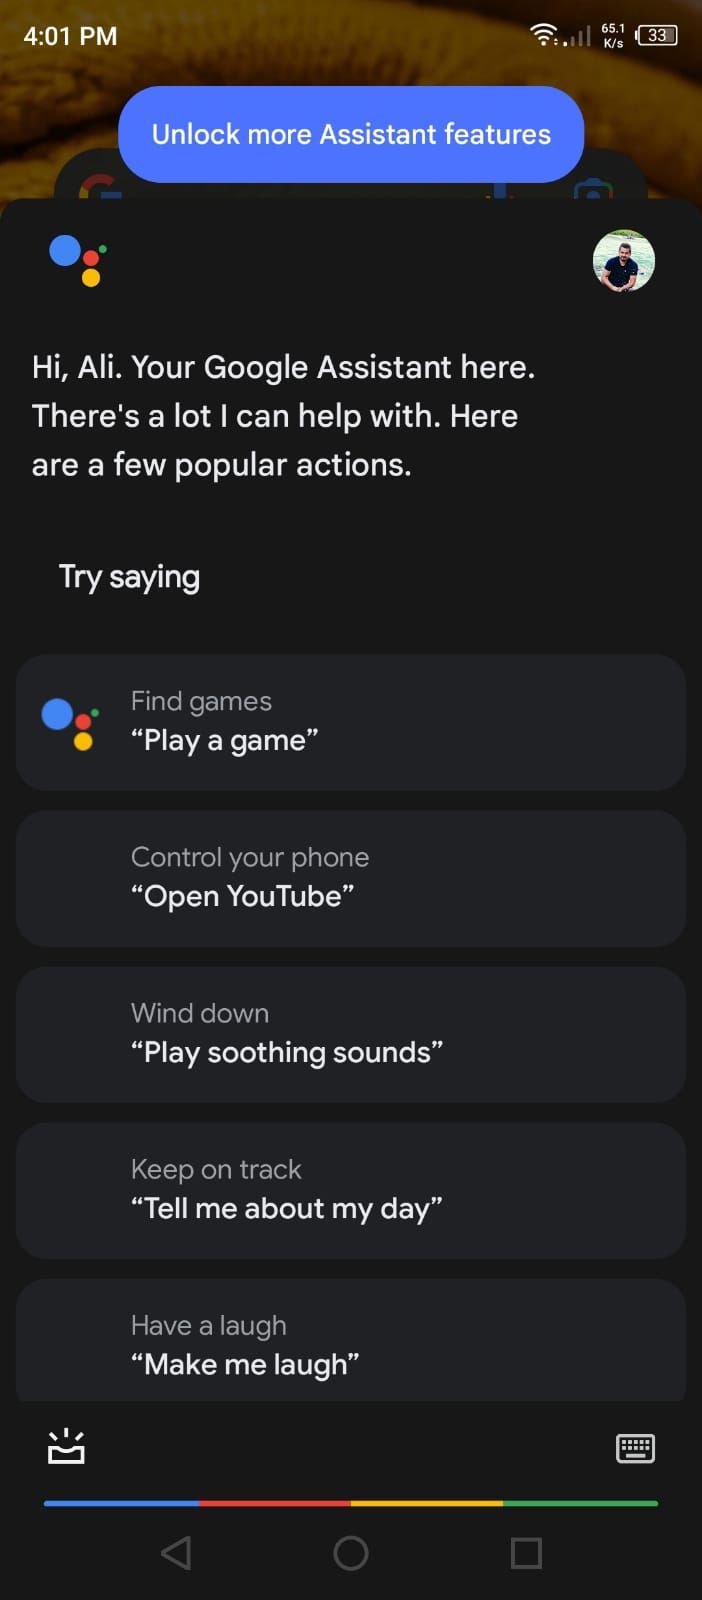 Google Assistant Command Suggestions